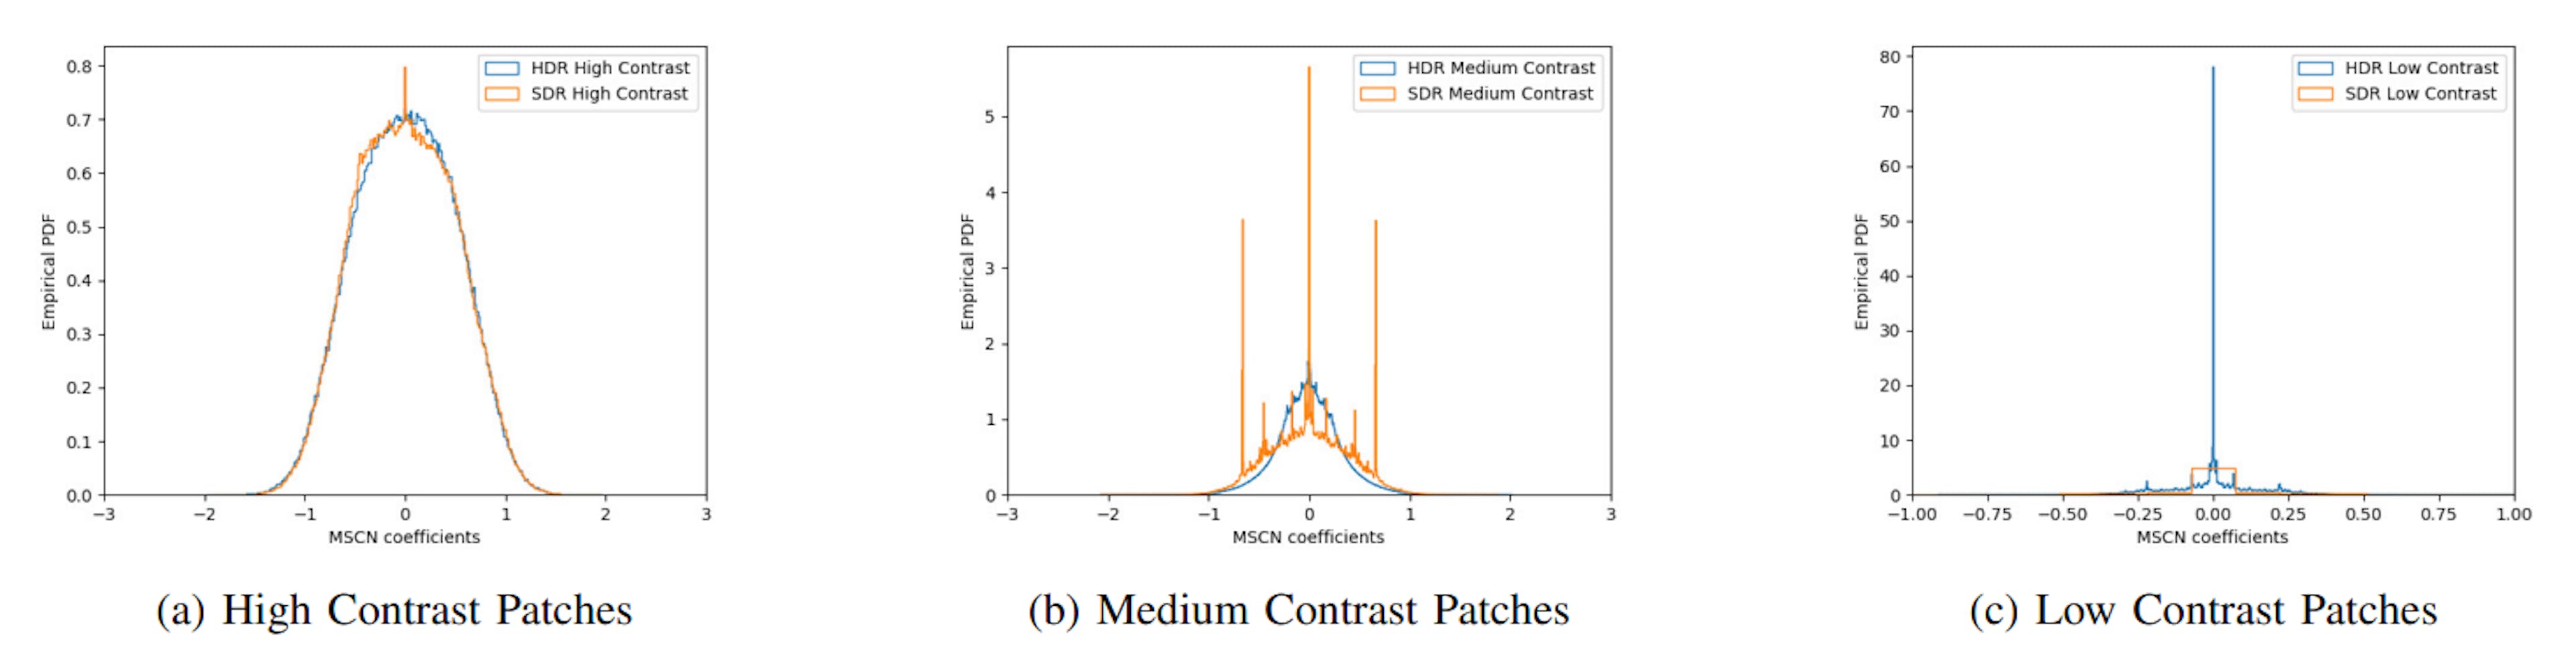 Fig. 9: Comparing HDR and SDR MSCN coefficients of different contrast groups.